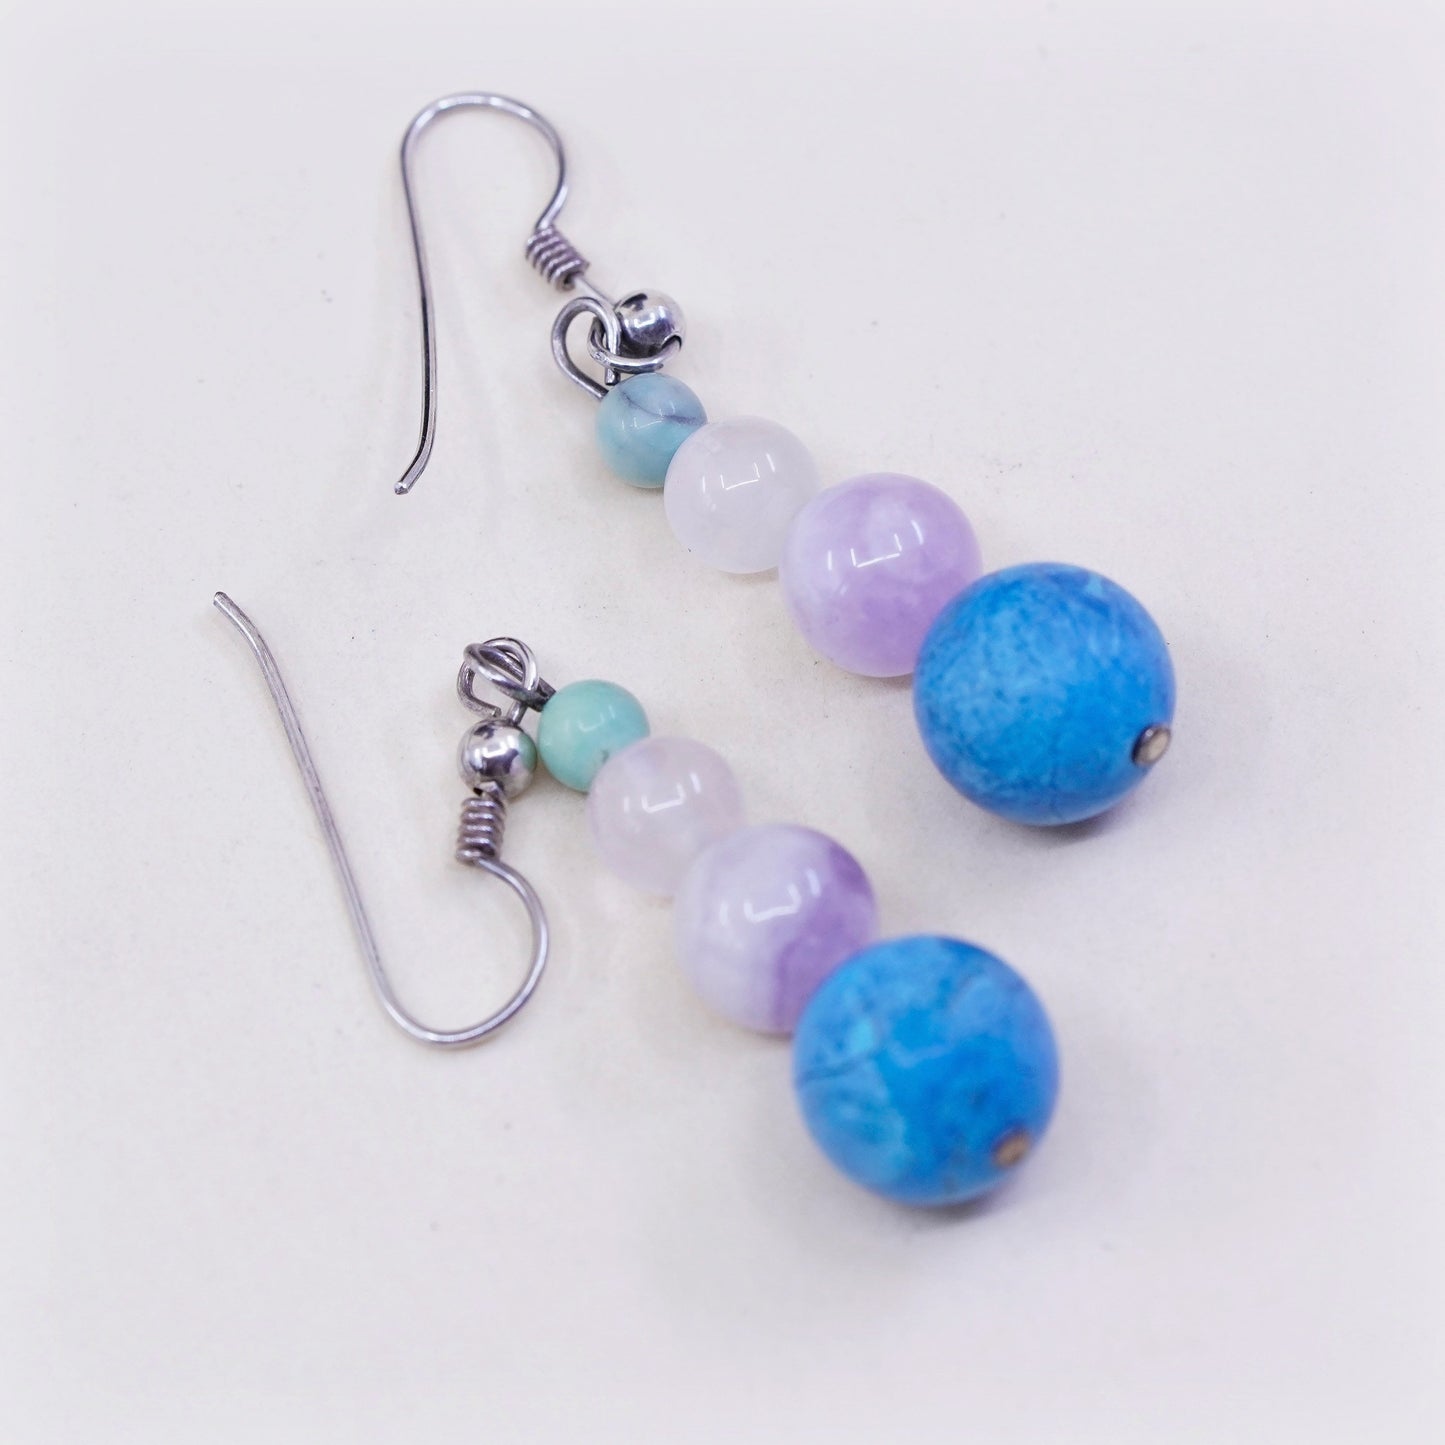 sterling 925 silver handmade earrings w/ turquoise crystal and amethyst beads